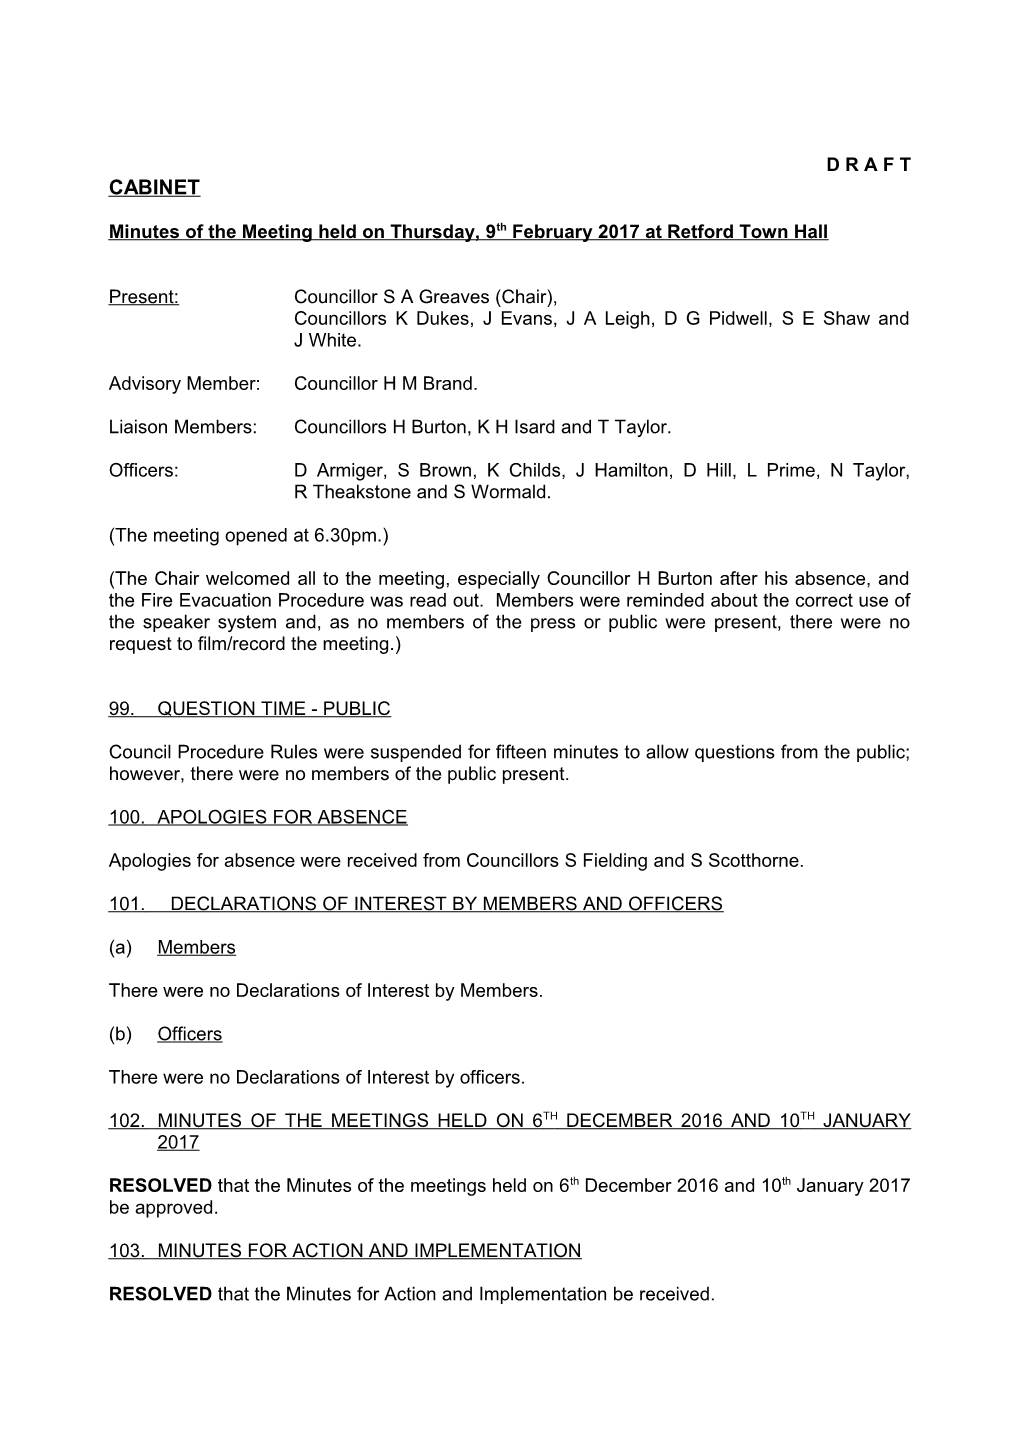 Minutes of the Meeting Held on Thursday, 9Th February 2017 at Retford Town Hall